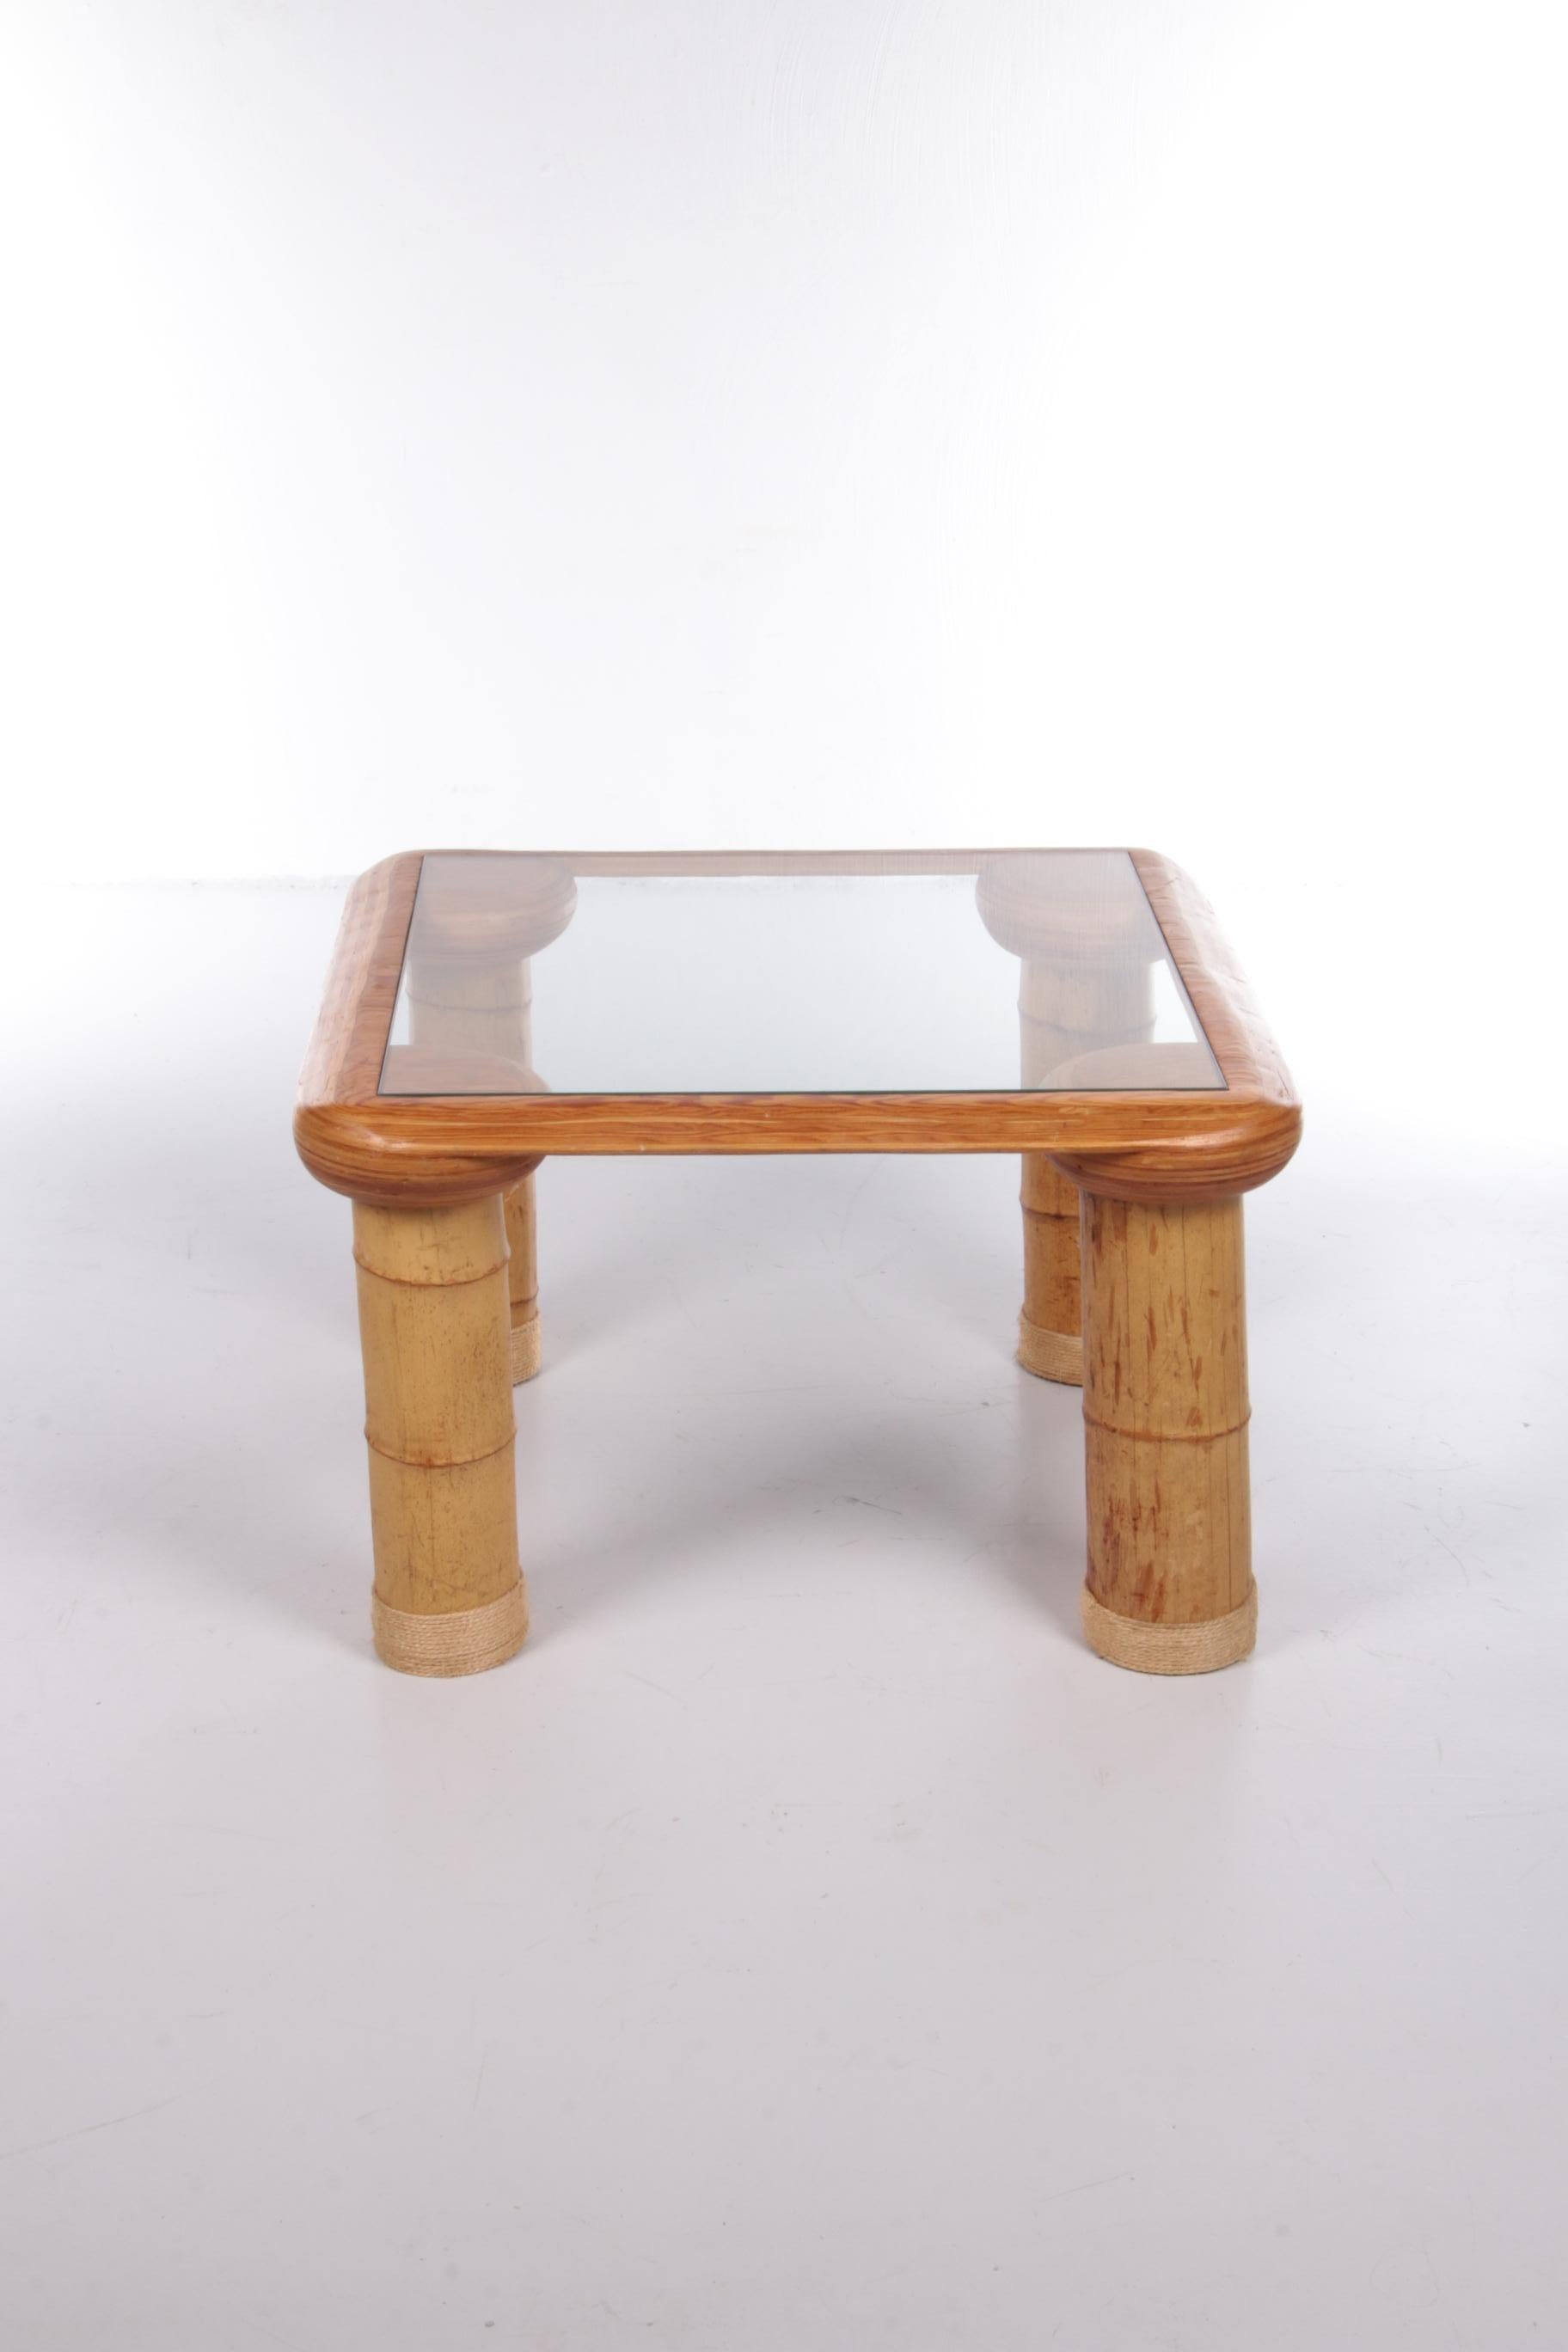 Vintage French Bamboo with glass coffee table 1970s

Vintage bamboo coffee table to bring the bohemian style into your home.

We bought this table in France and found it on a beautiful trip through beautiful France.

If you don't have much space,